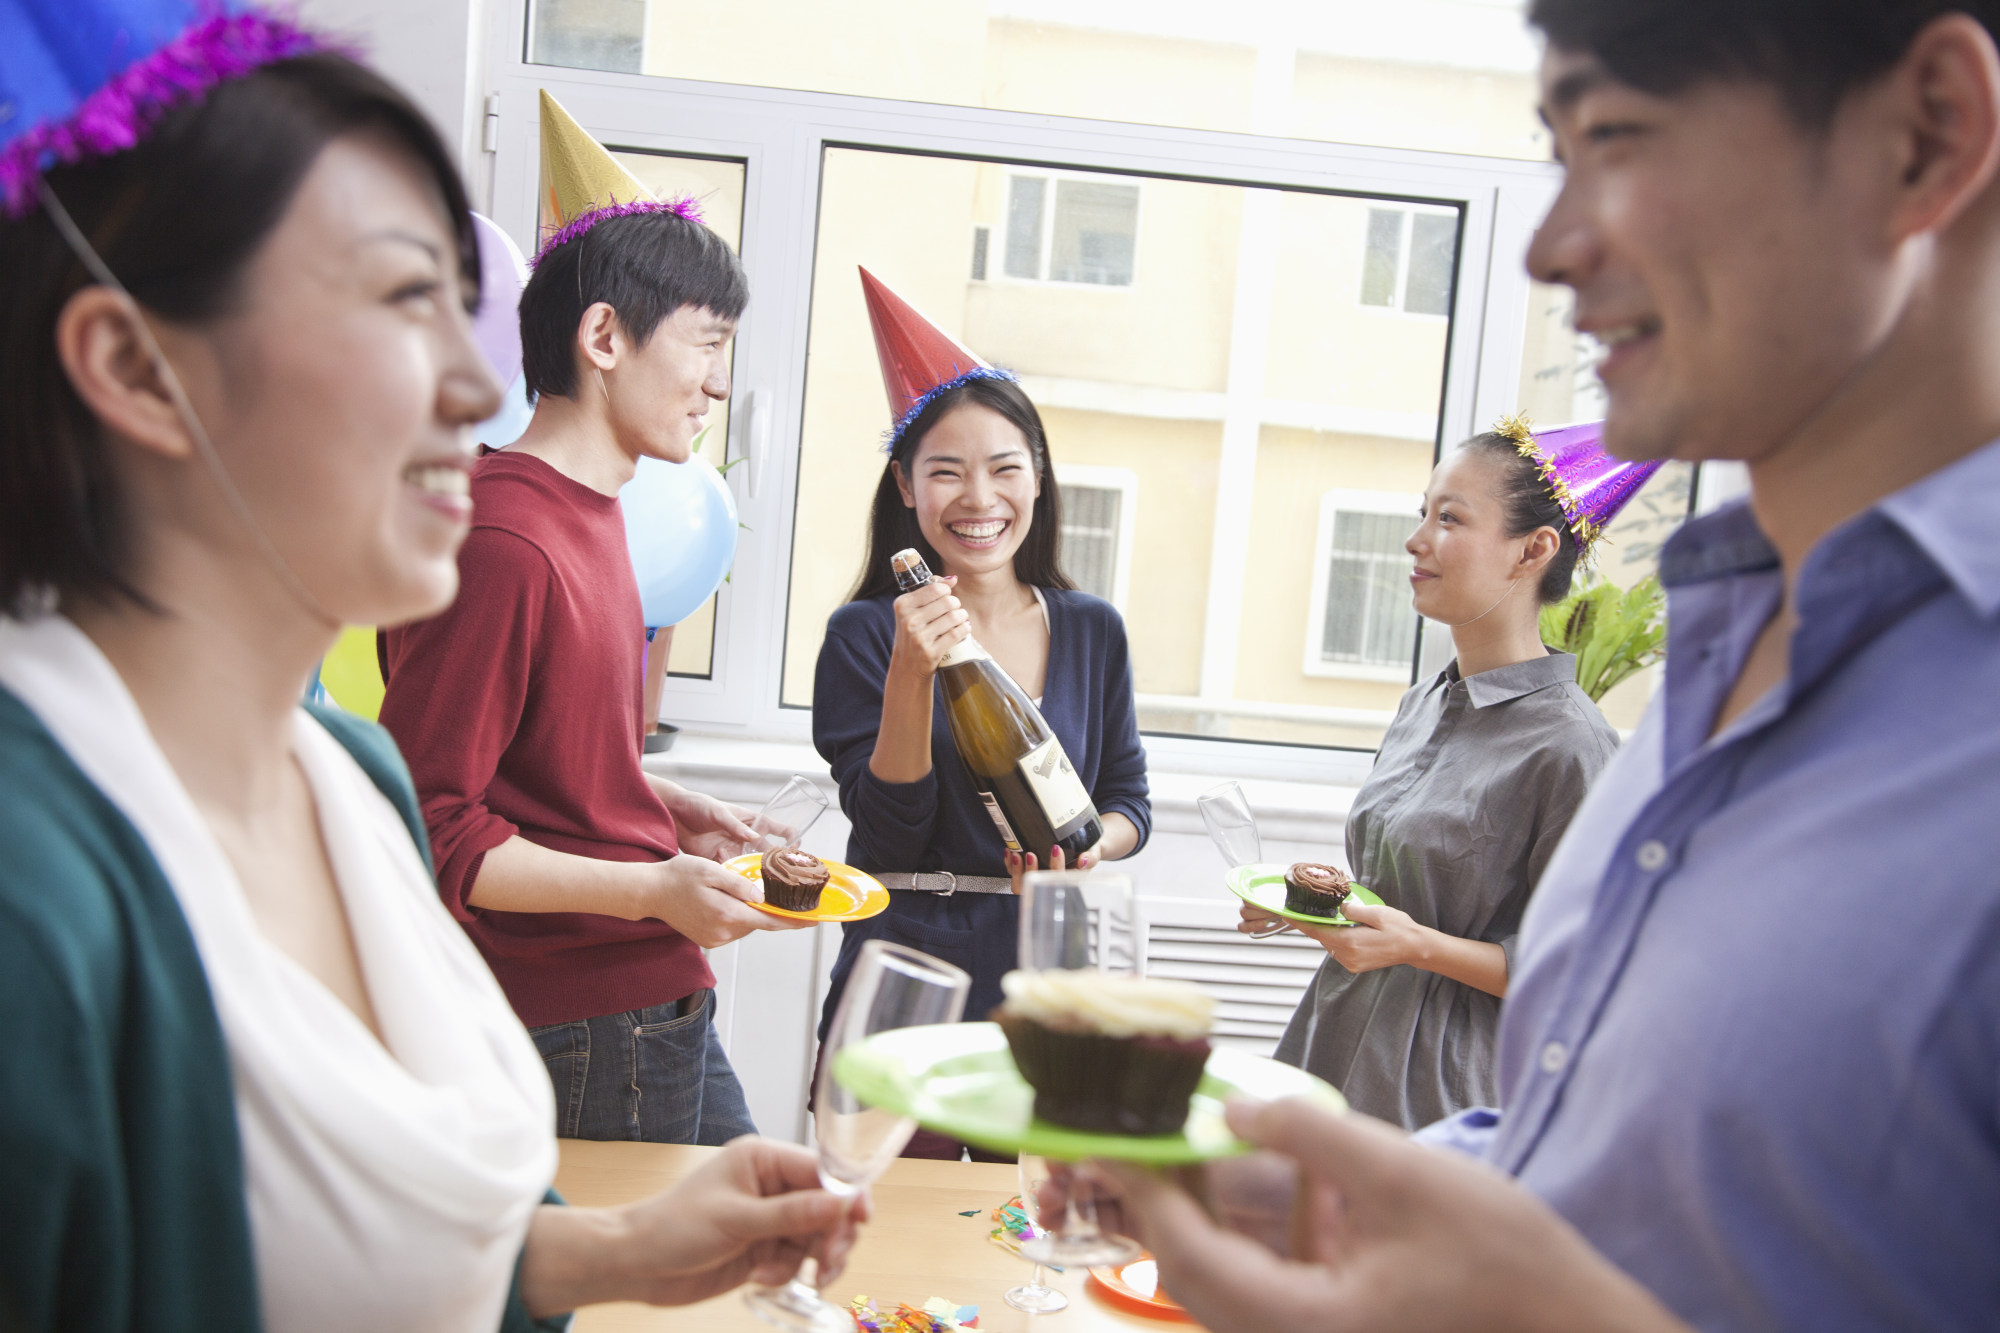 The nature of team-building sessions organised by companies in China often raises eyebrows. Photo: Shutterstock